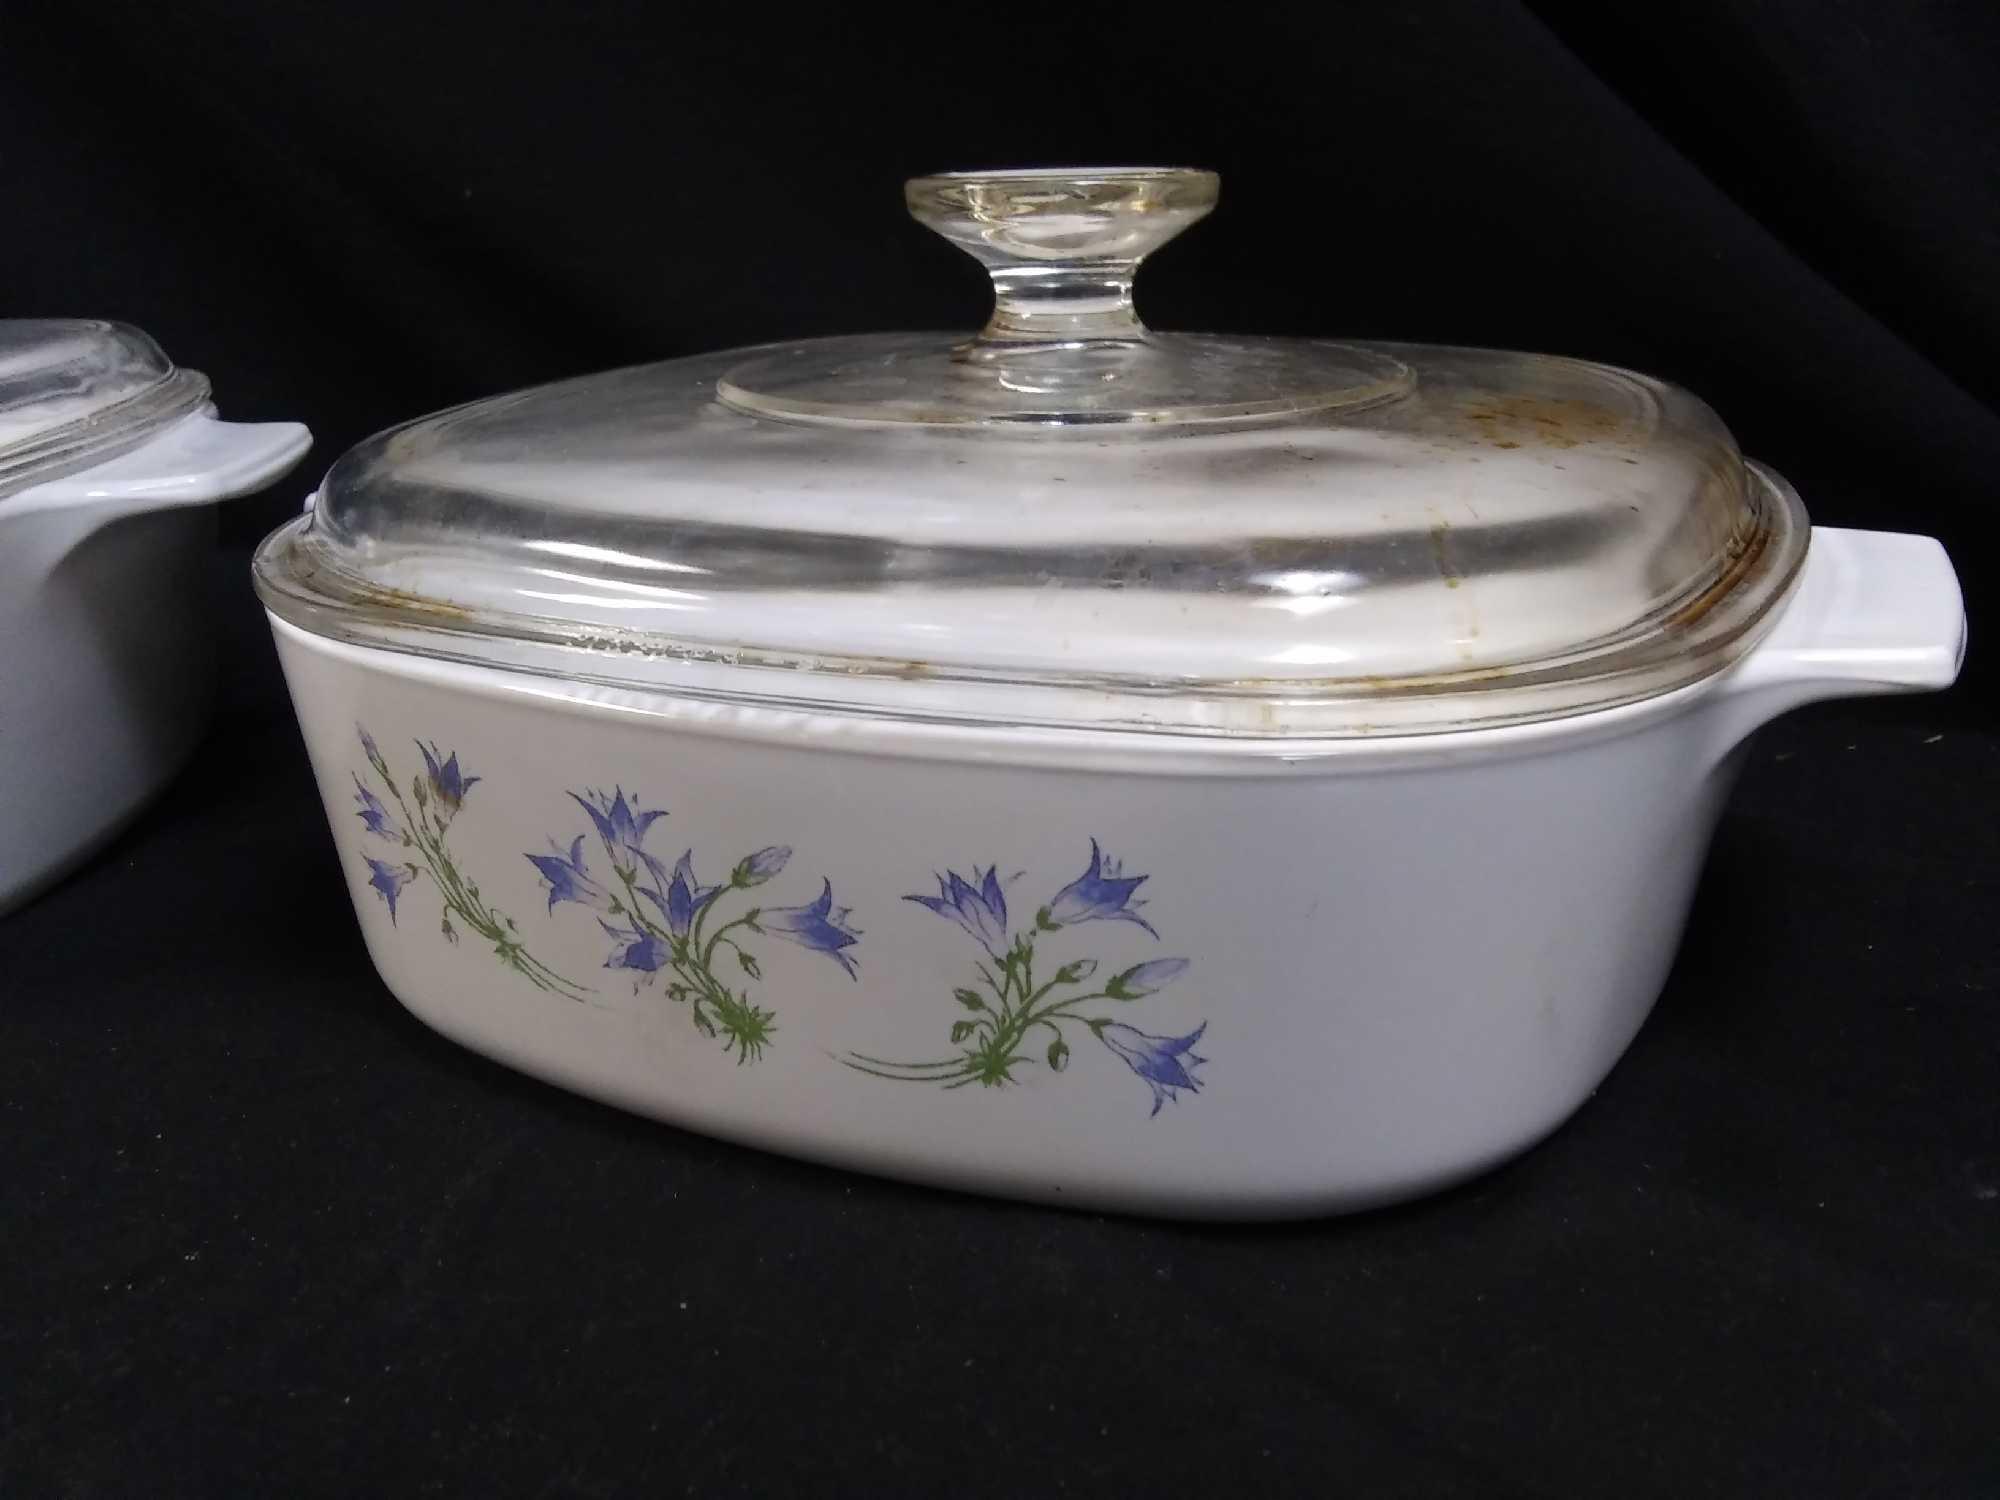 Pair of Blue Dusk Casserole Corning Ware with Lids